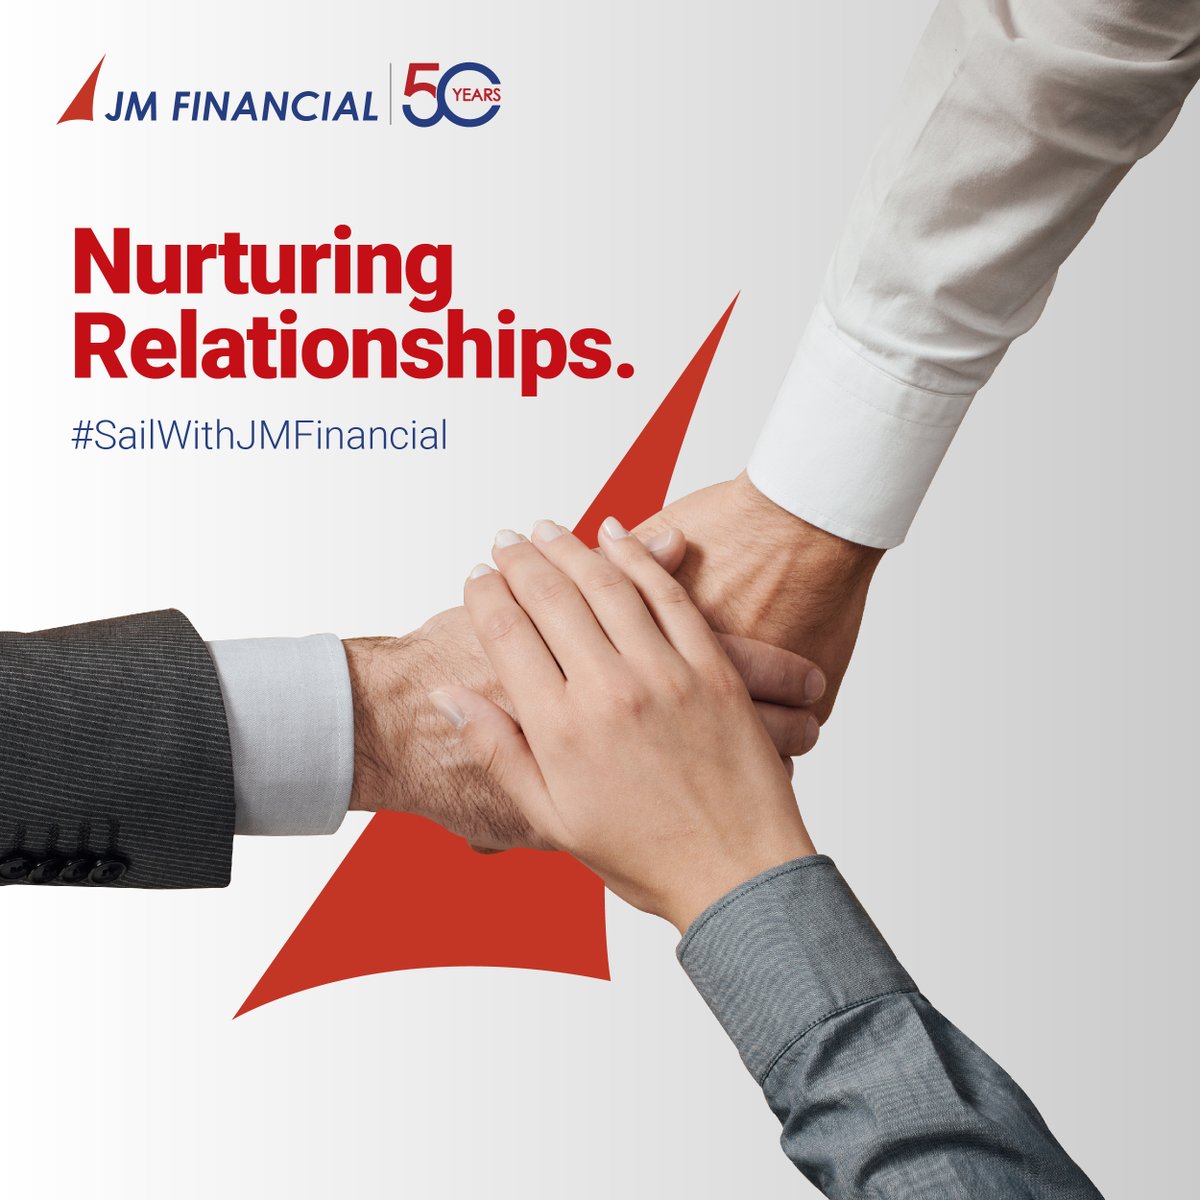 Cultivating connections and building bonds that last a lifetime.

#JMFinancial #50yearsofJMFinancial #SailWithJMFinancial #NurturingRelationships